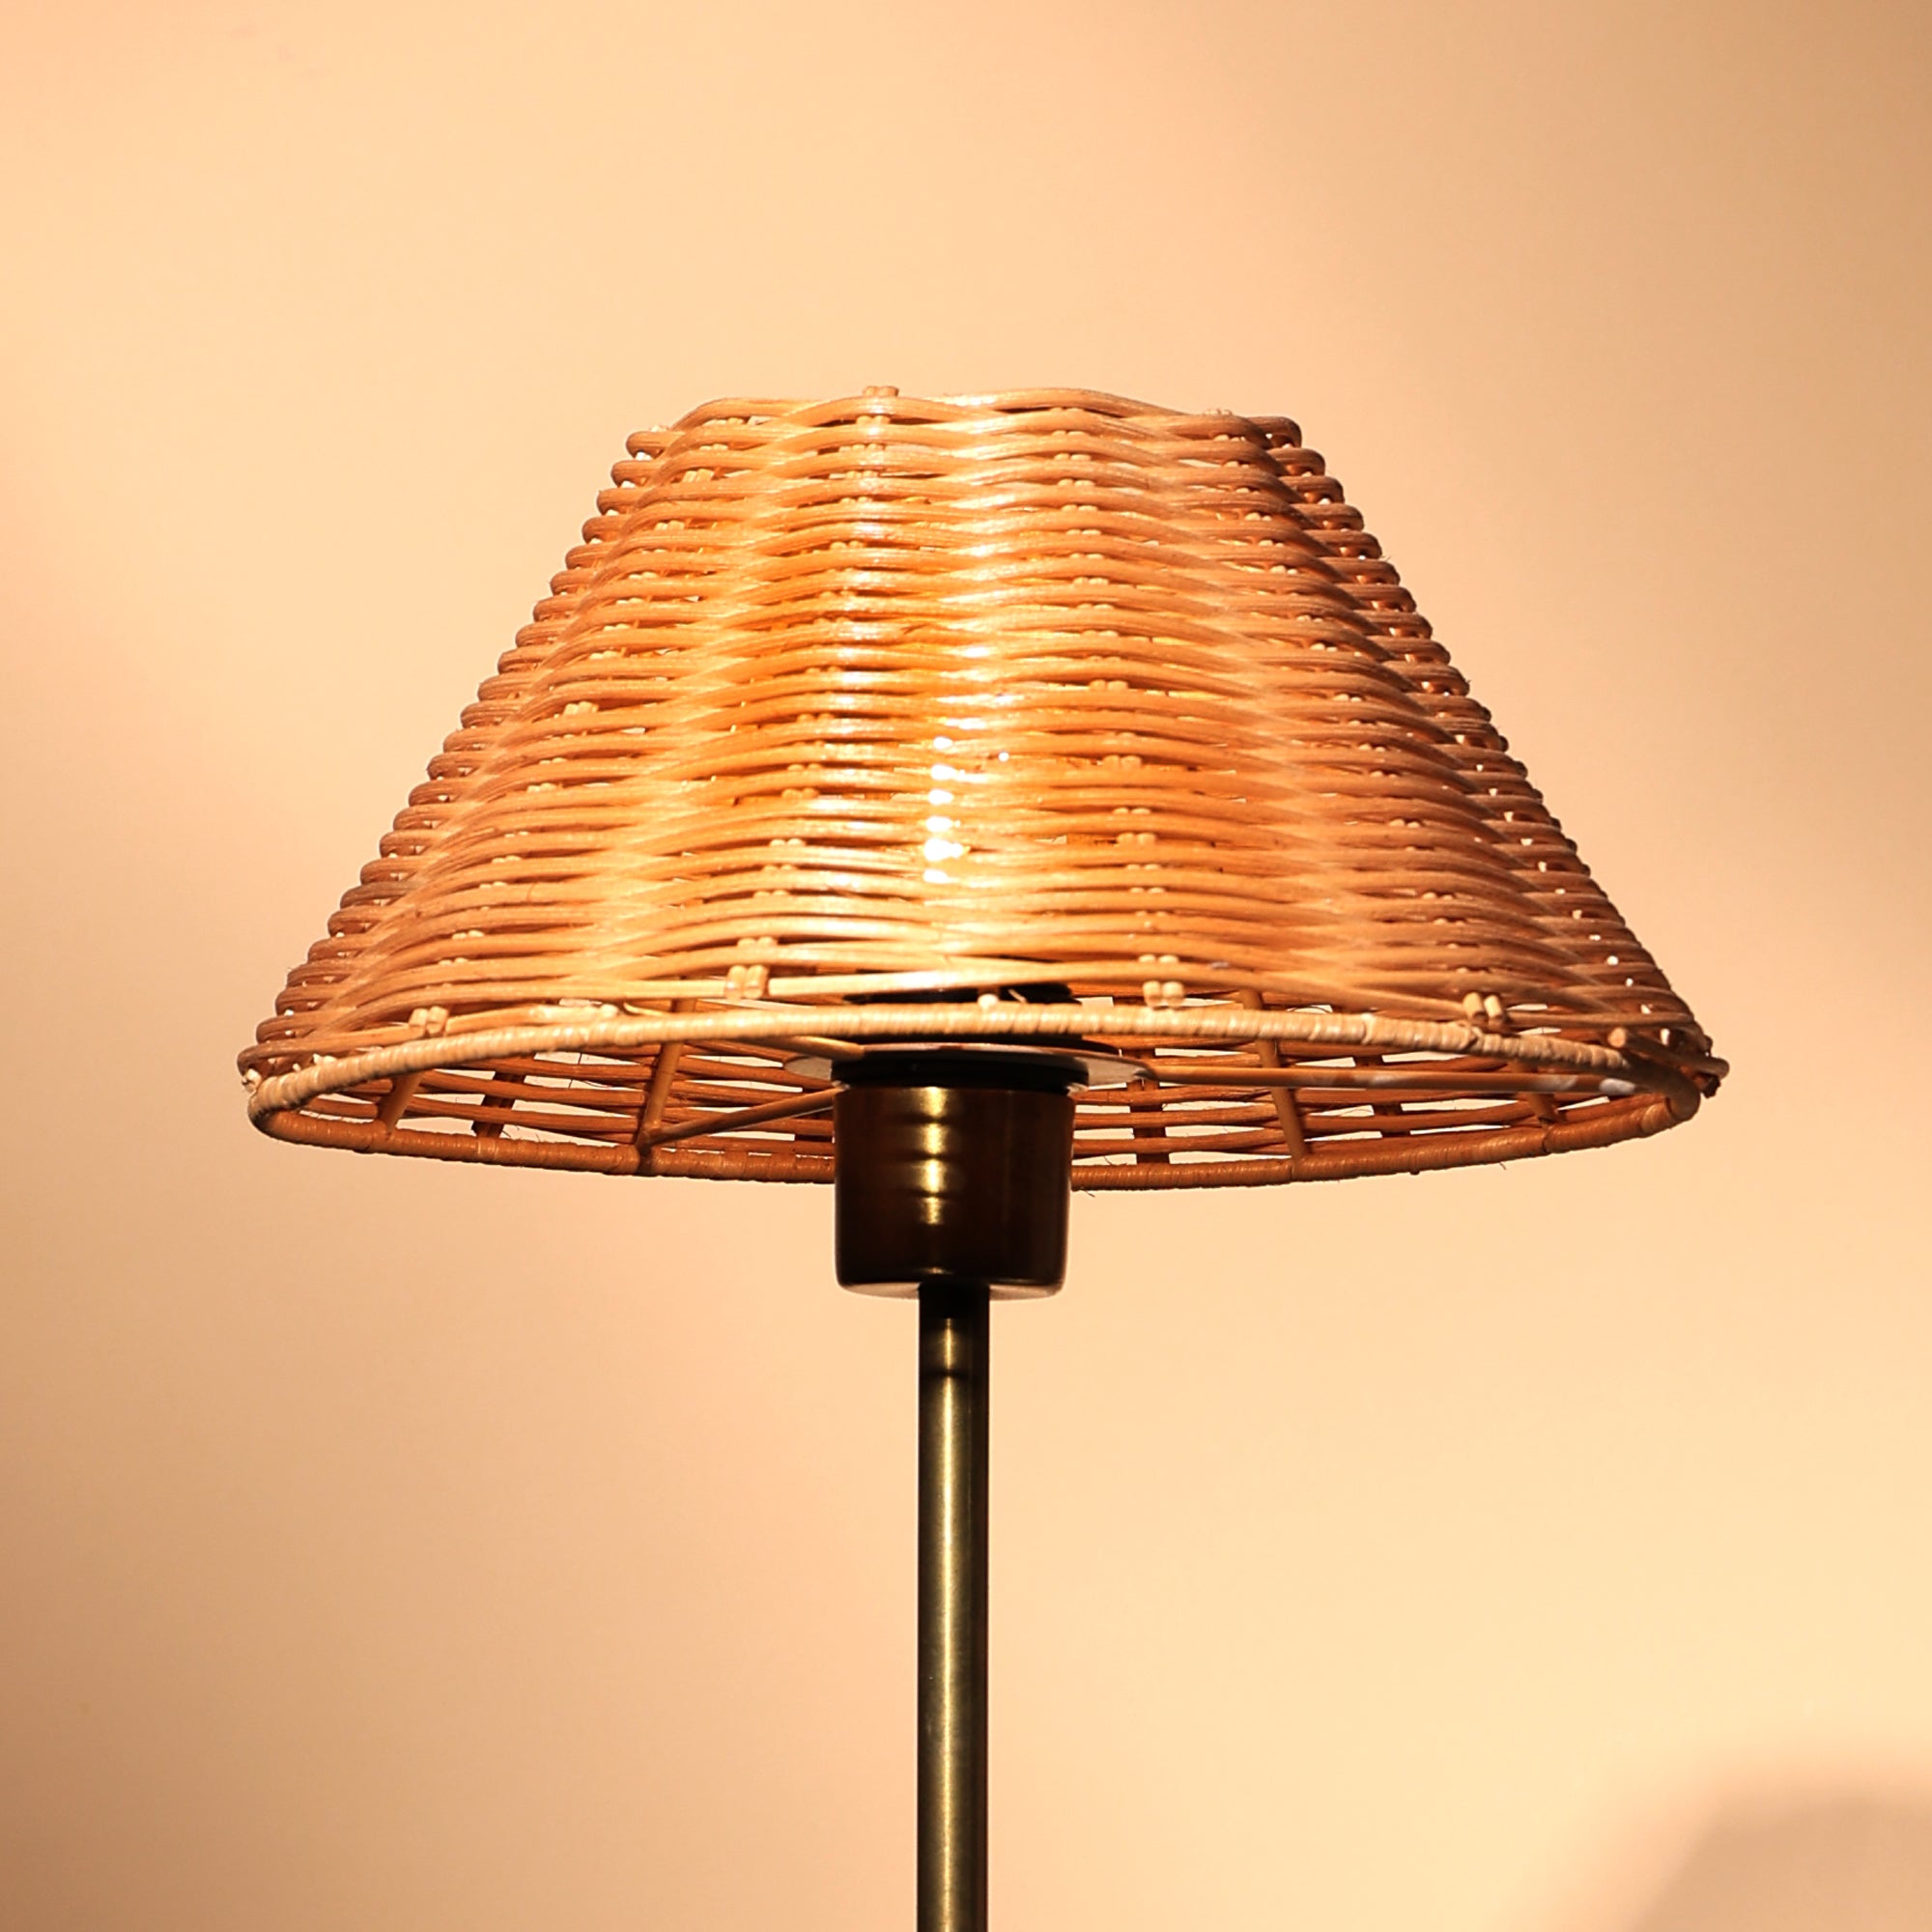 Natural Cane Lamp - Made from Rattan, Handweaving, Antique Finish of Base